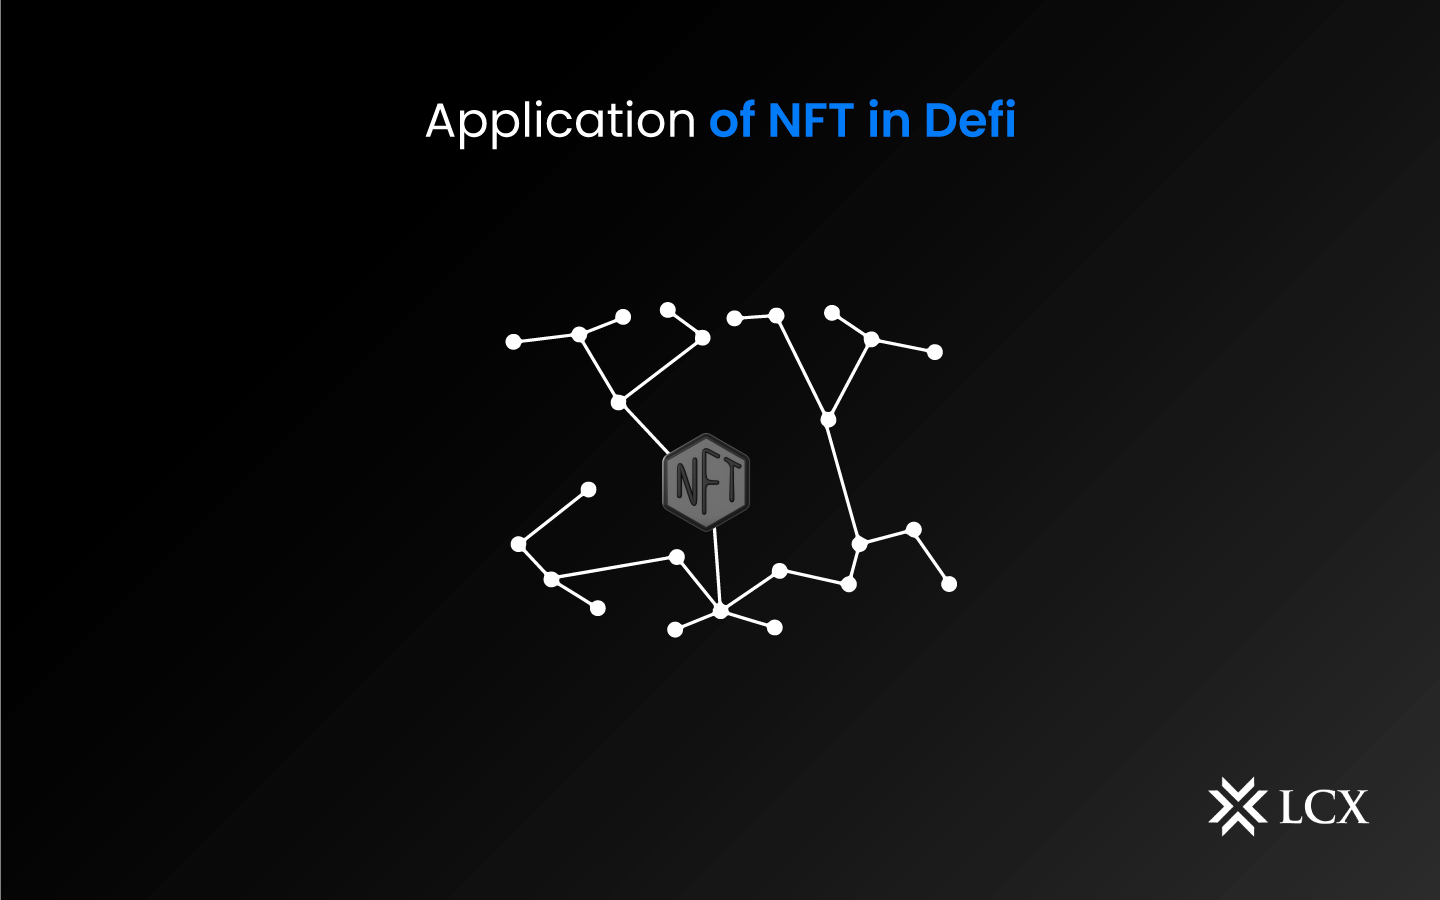 Applications of NFTs in DeFi